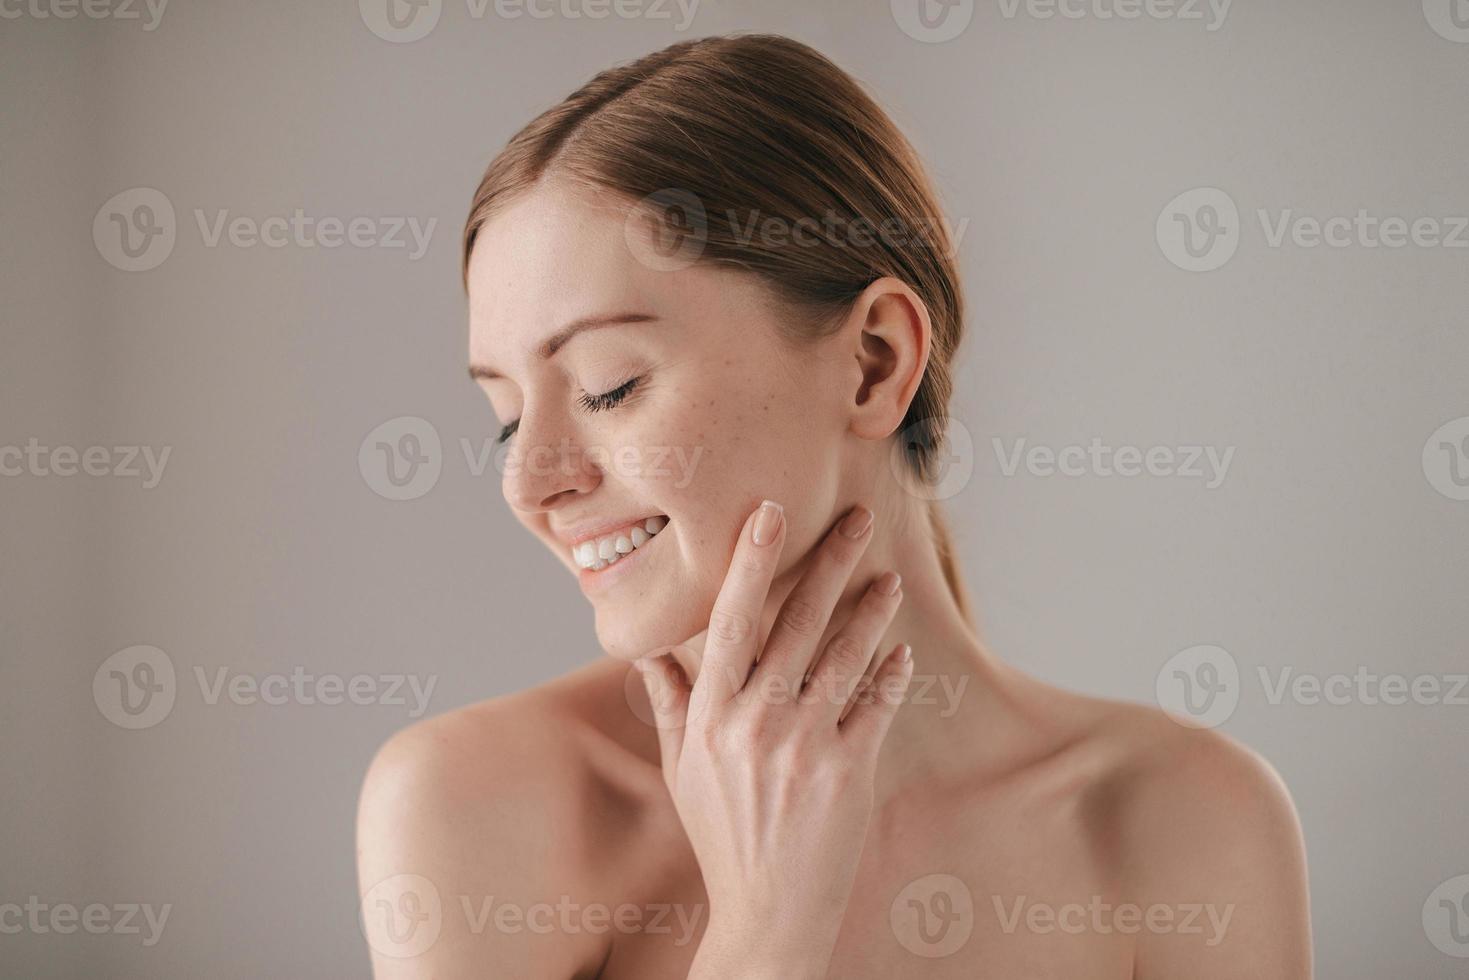 Sensitive care for a luminous skin. Portrait of redhead woman with freckles keeping eyes closed and smiling while touching her face and standing against grey background photo